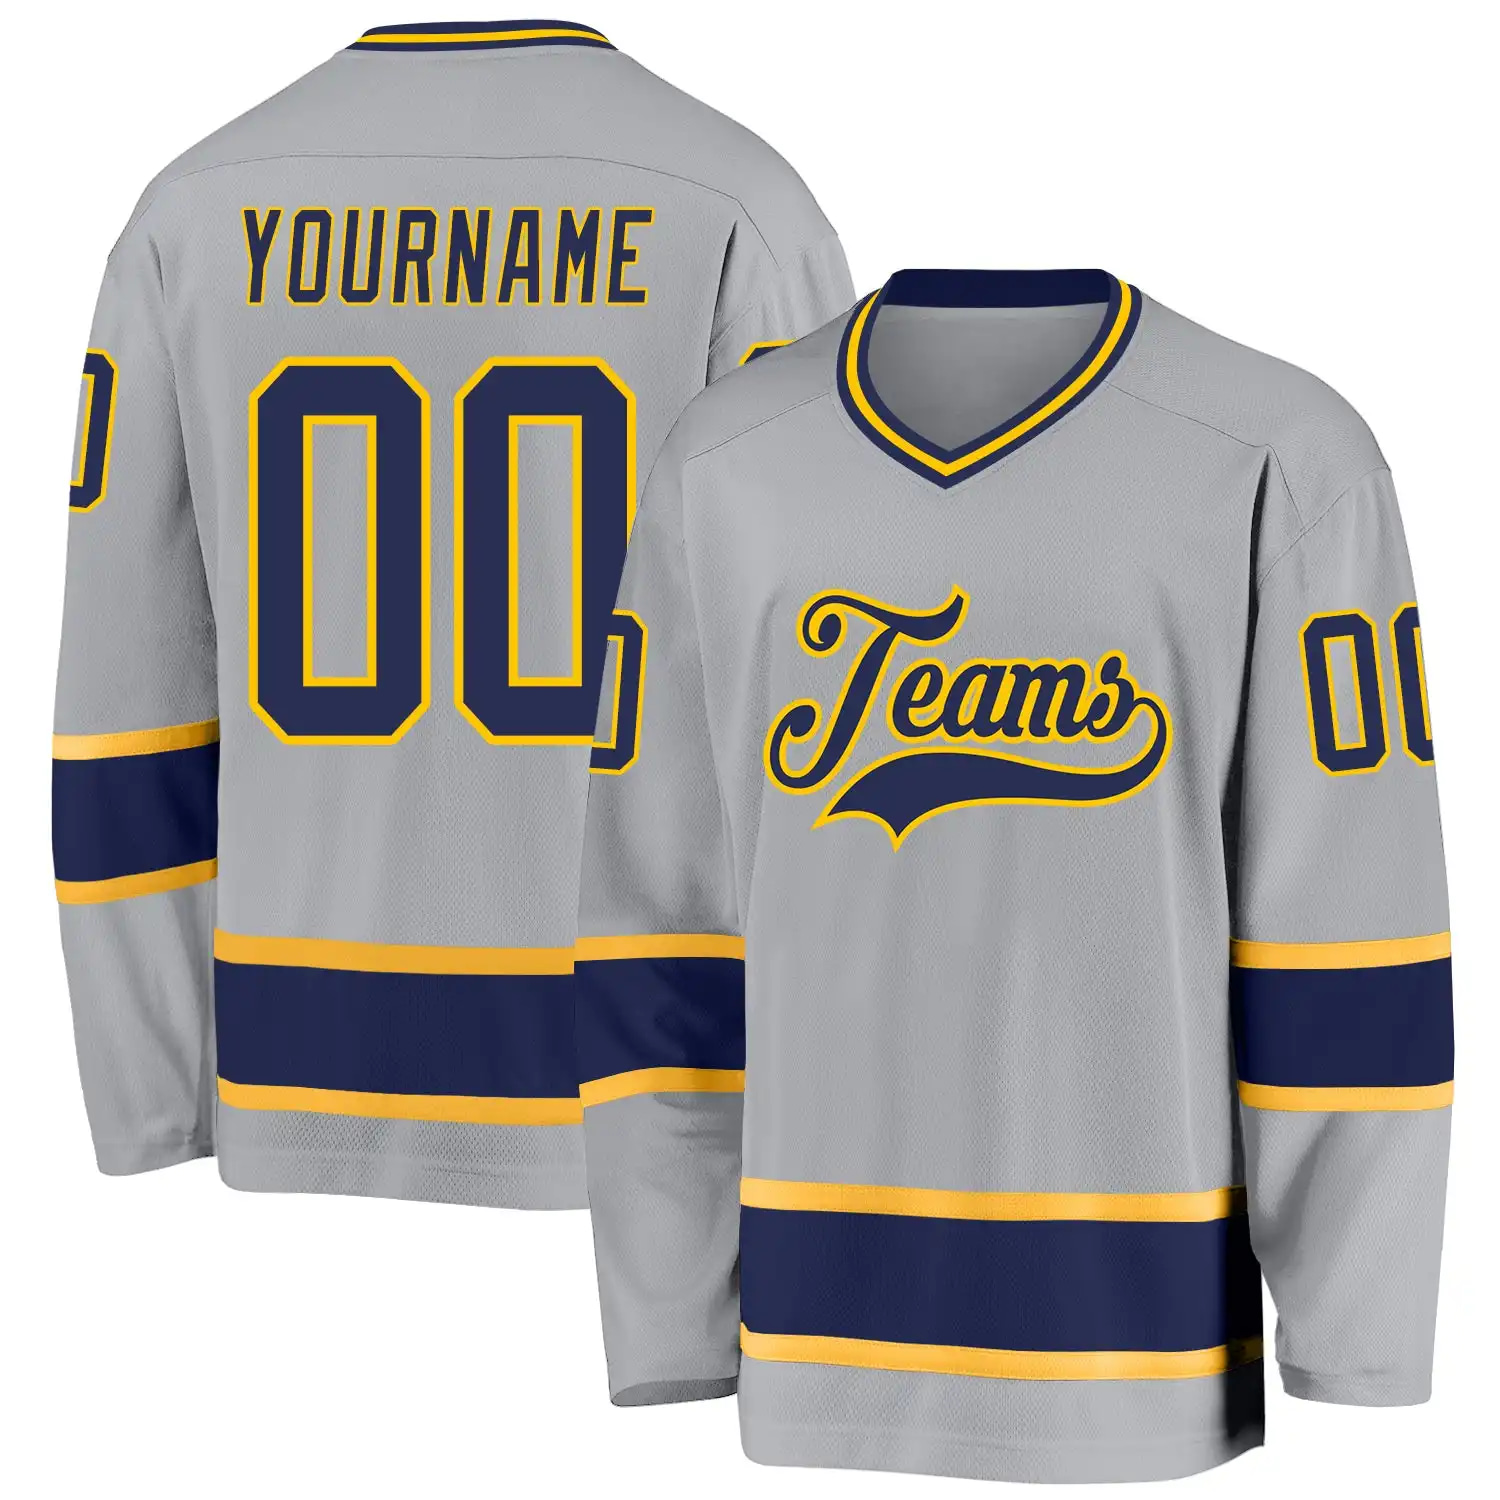 Stitched And Print Gray Navy-gold Hockey Jersey Custom